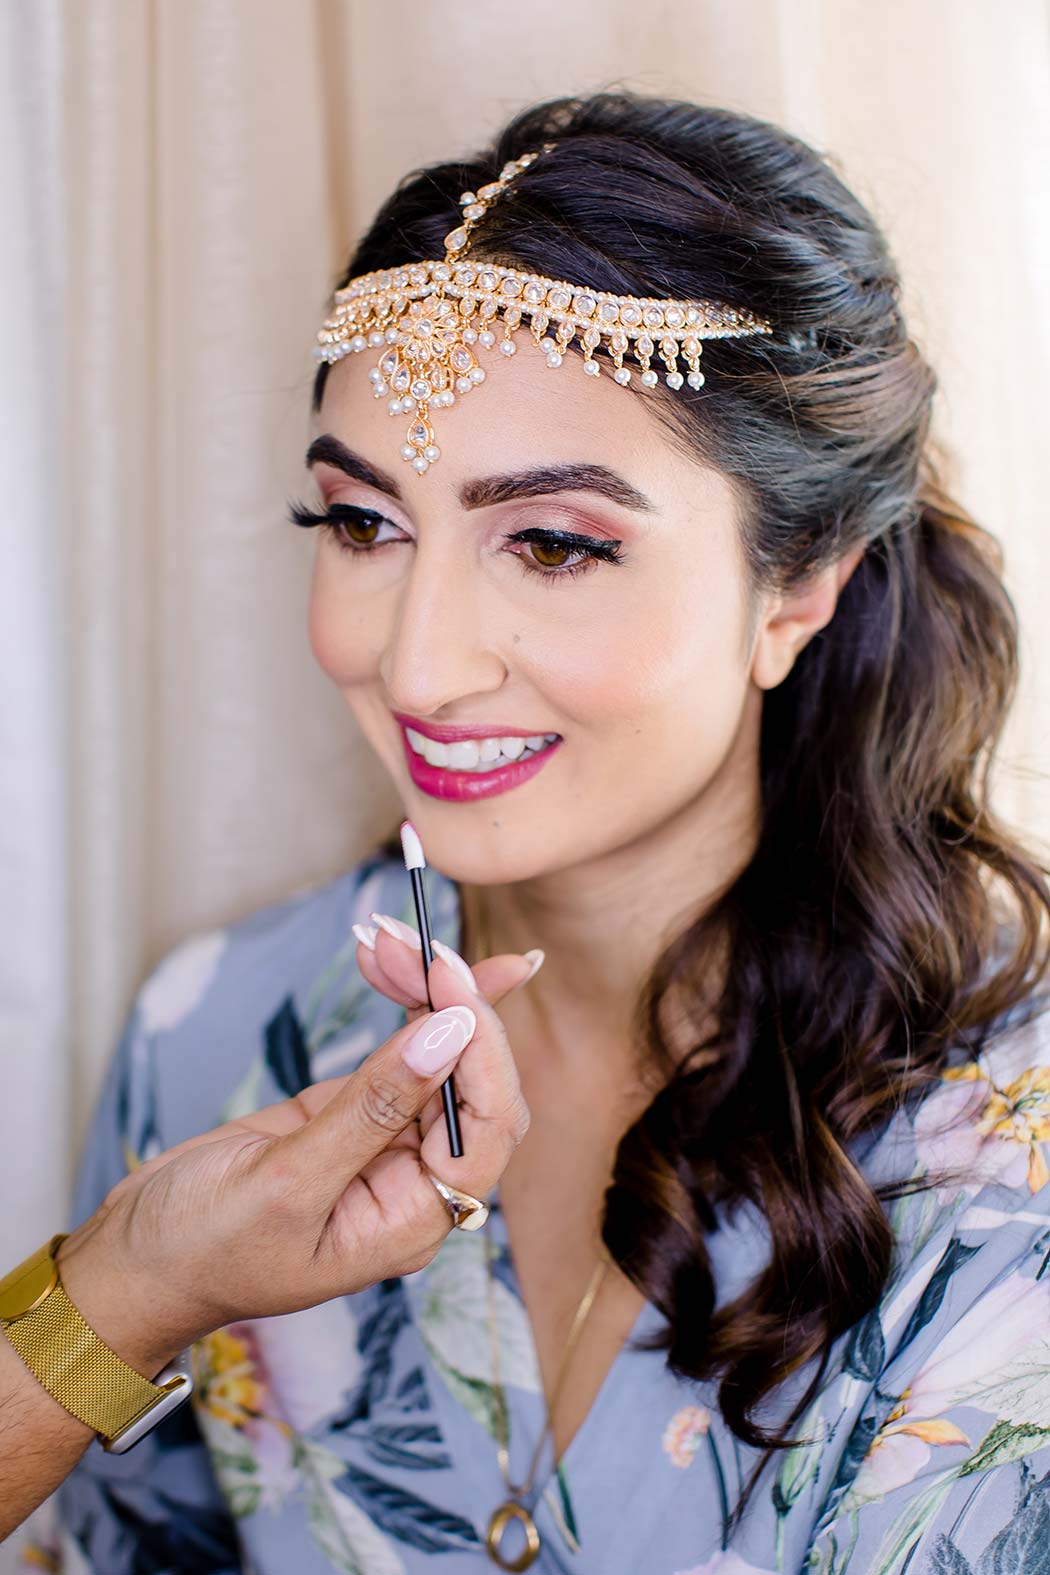 south indian wedding photographer | indian bride getting ready for her wedding | indian bride makeup | getting ready photographs indian wedding